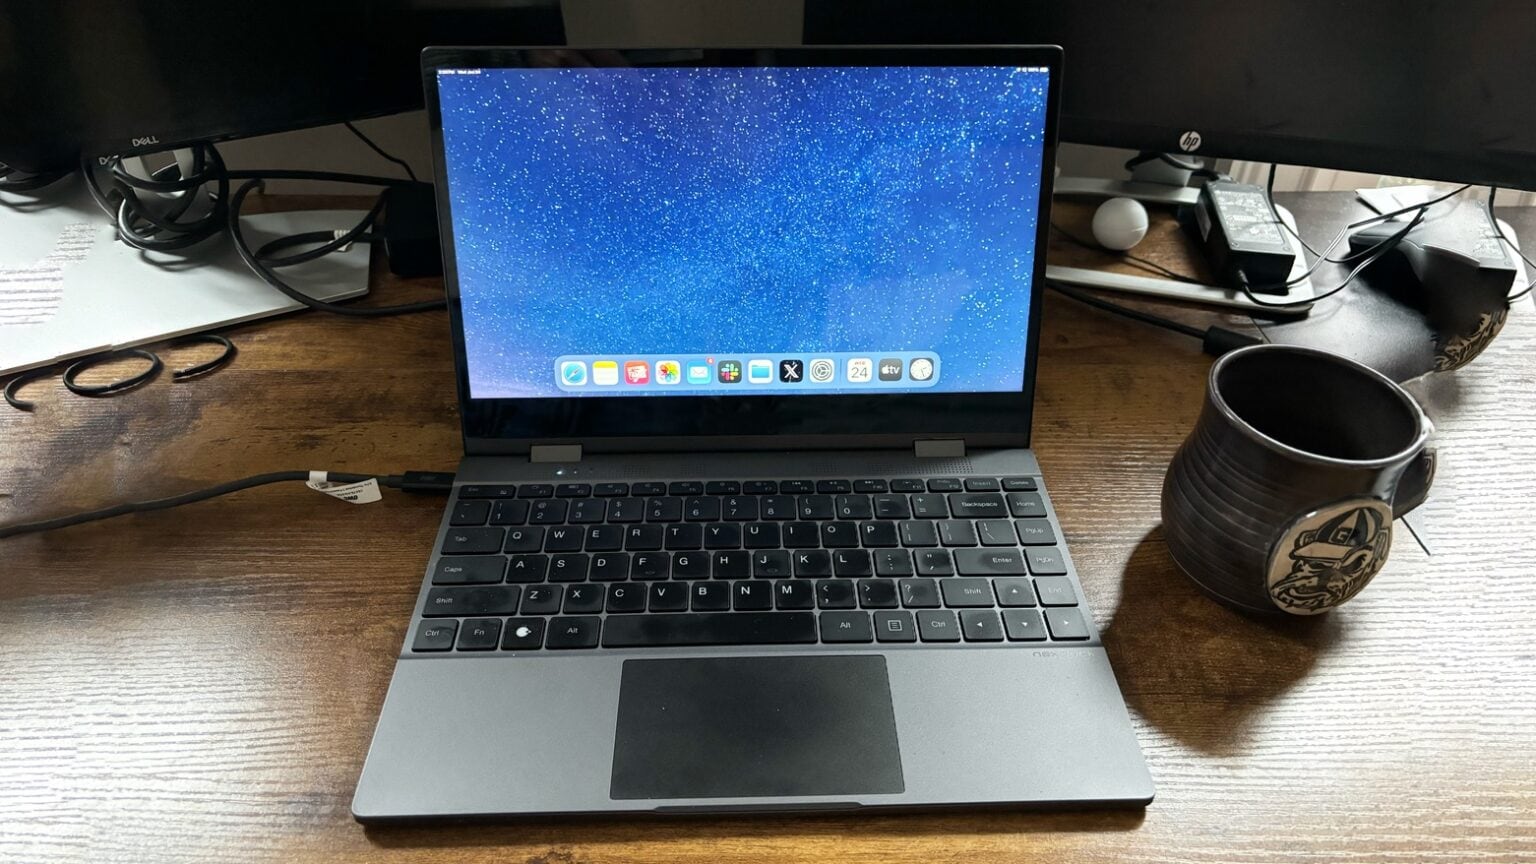 NexDock review: Turn iPad or iPhone into full-featured laptop